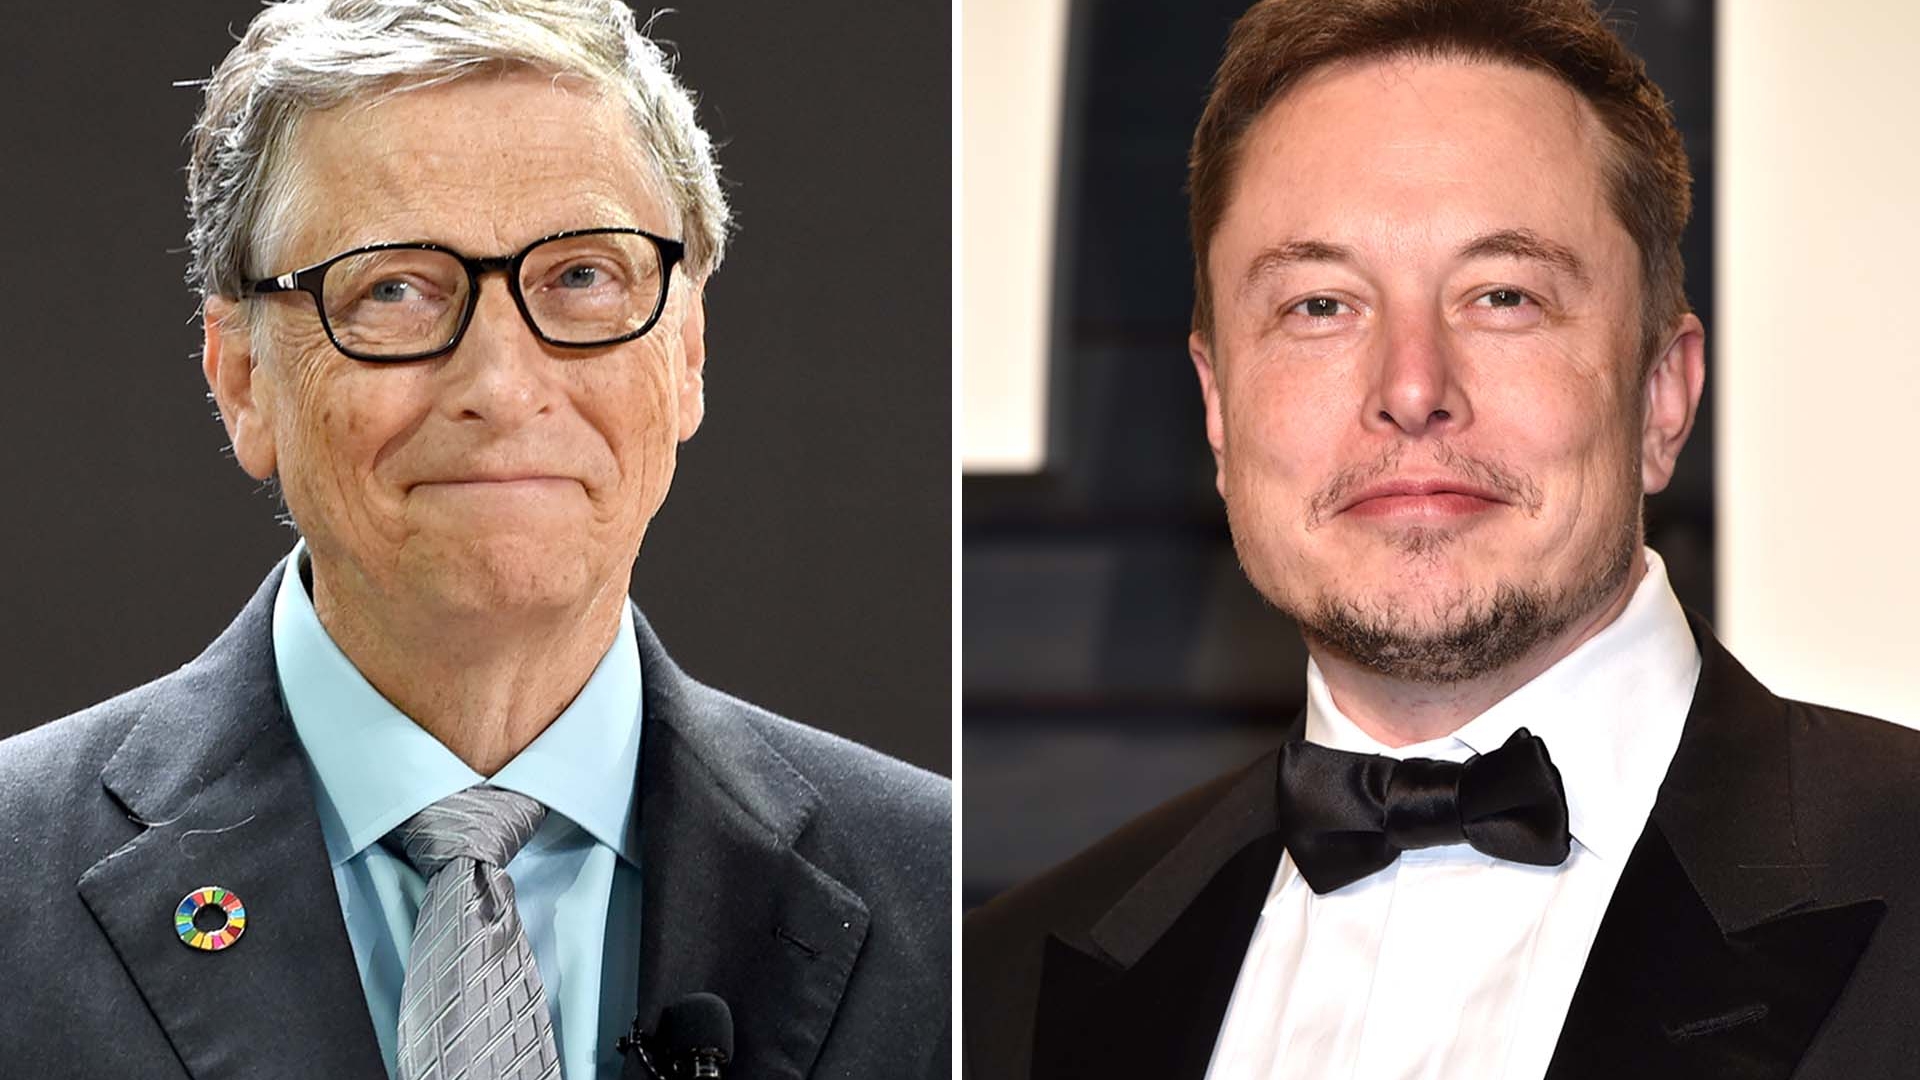 Personality test reveals traits of Musk & Gates - take quiz on your own habits